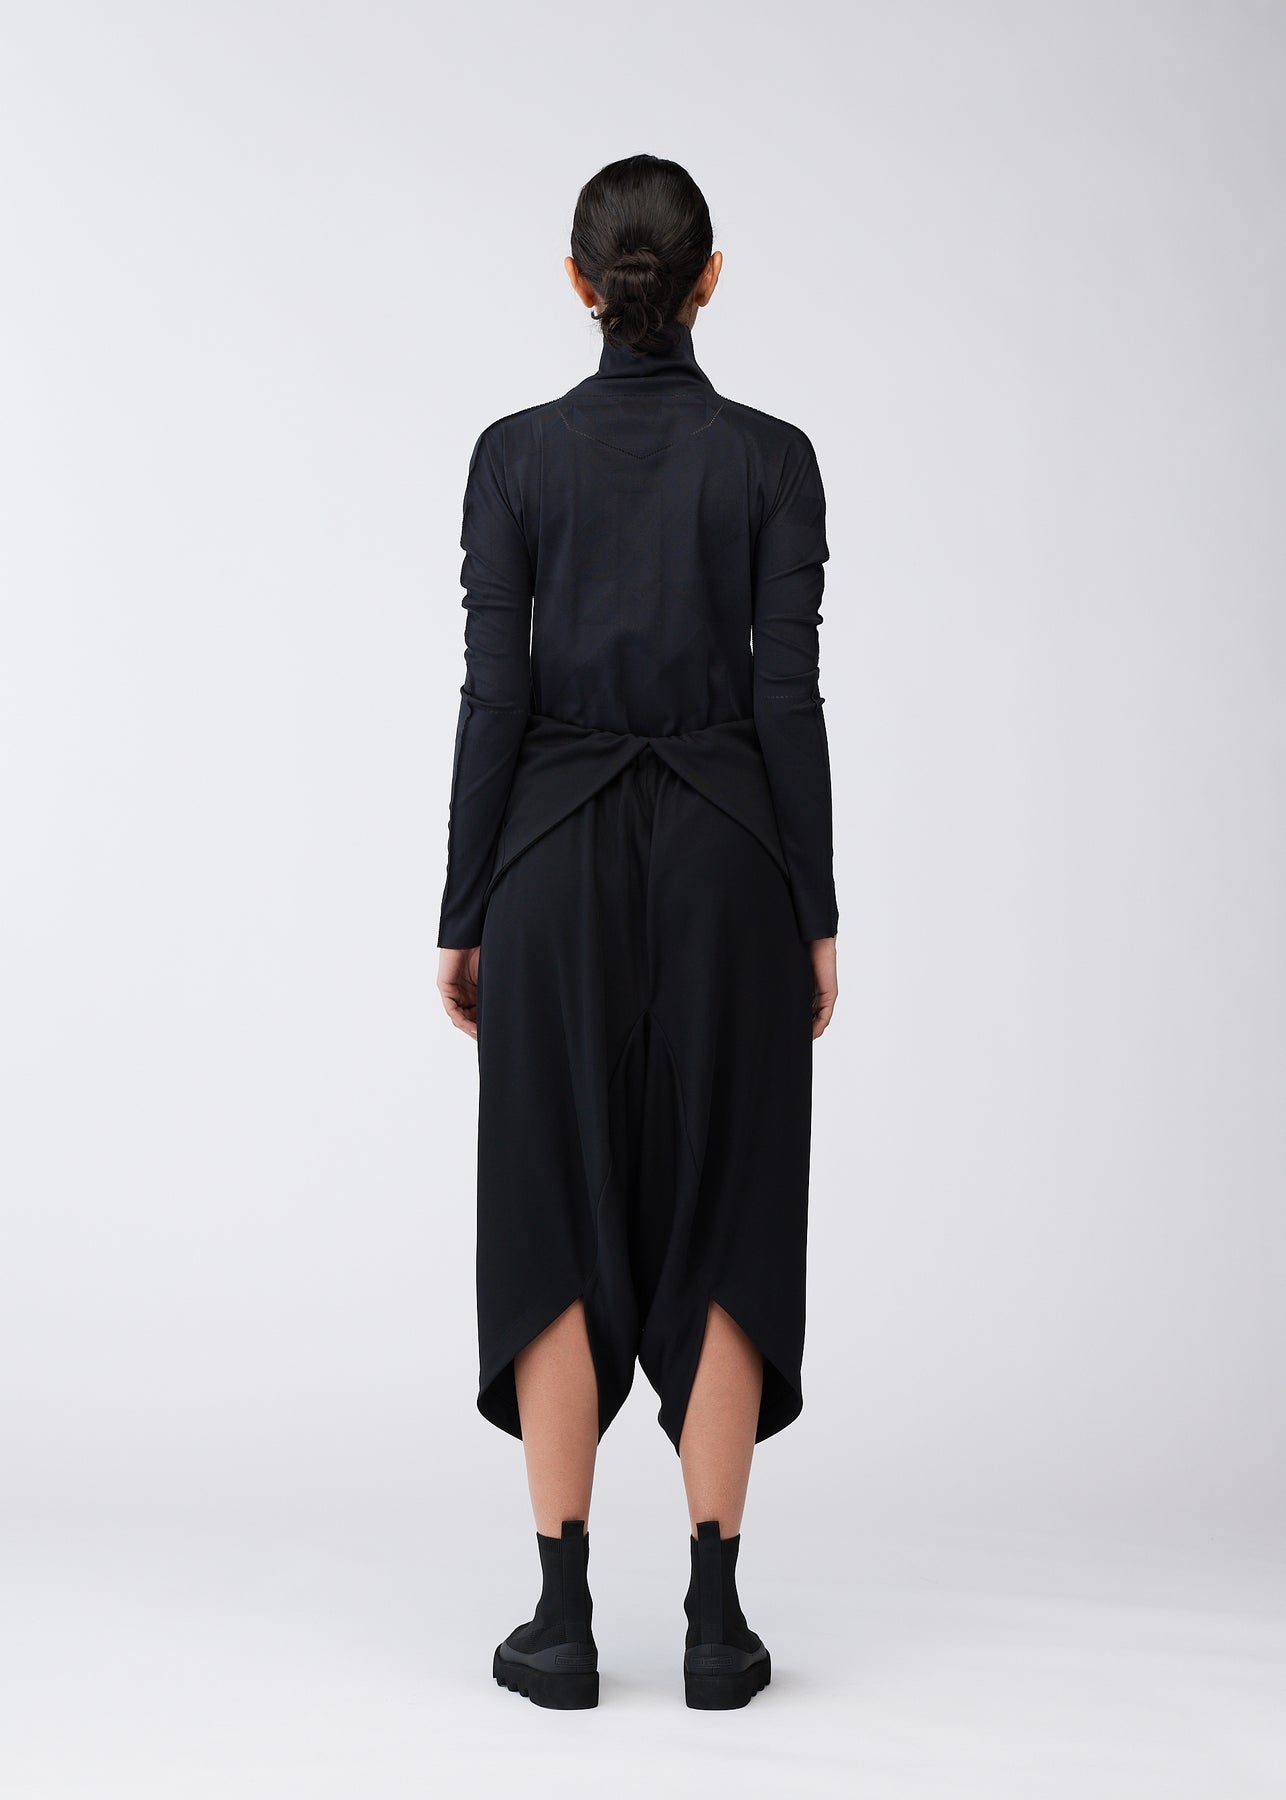 132 5. PANTS | The official ISSEY MIYAKE ONLINE STORE | ISSEY 